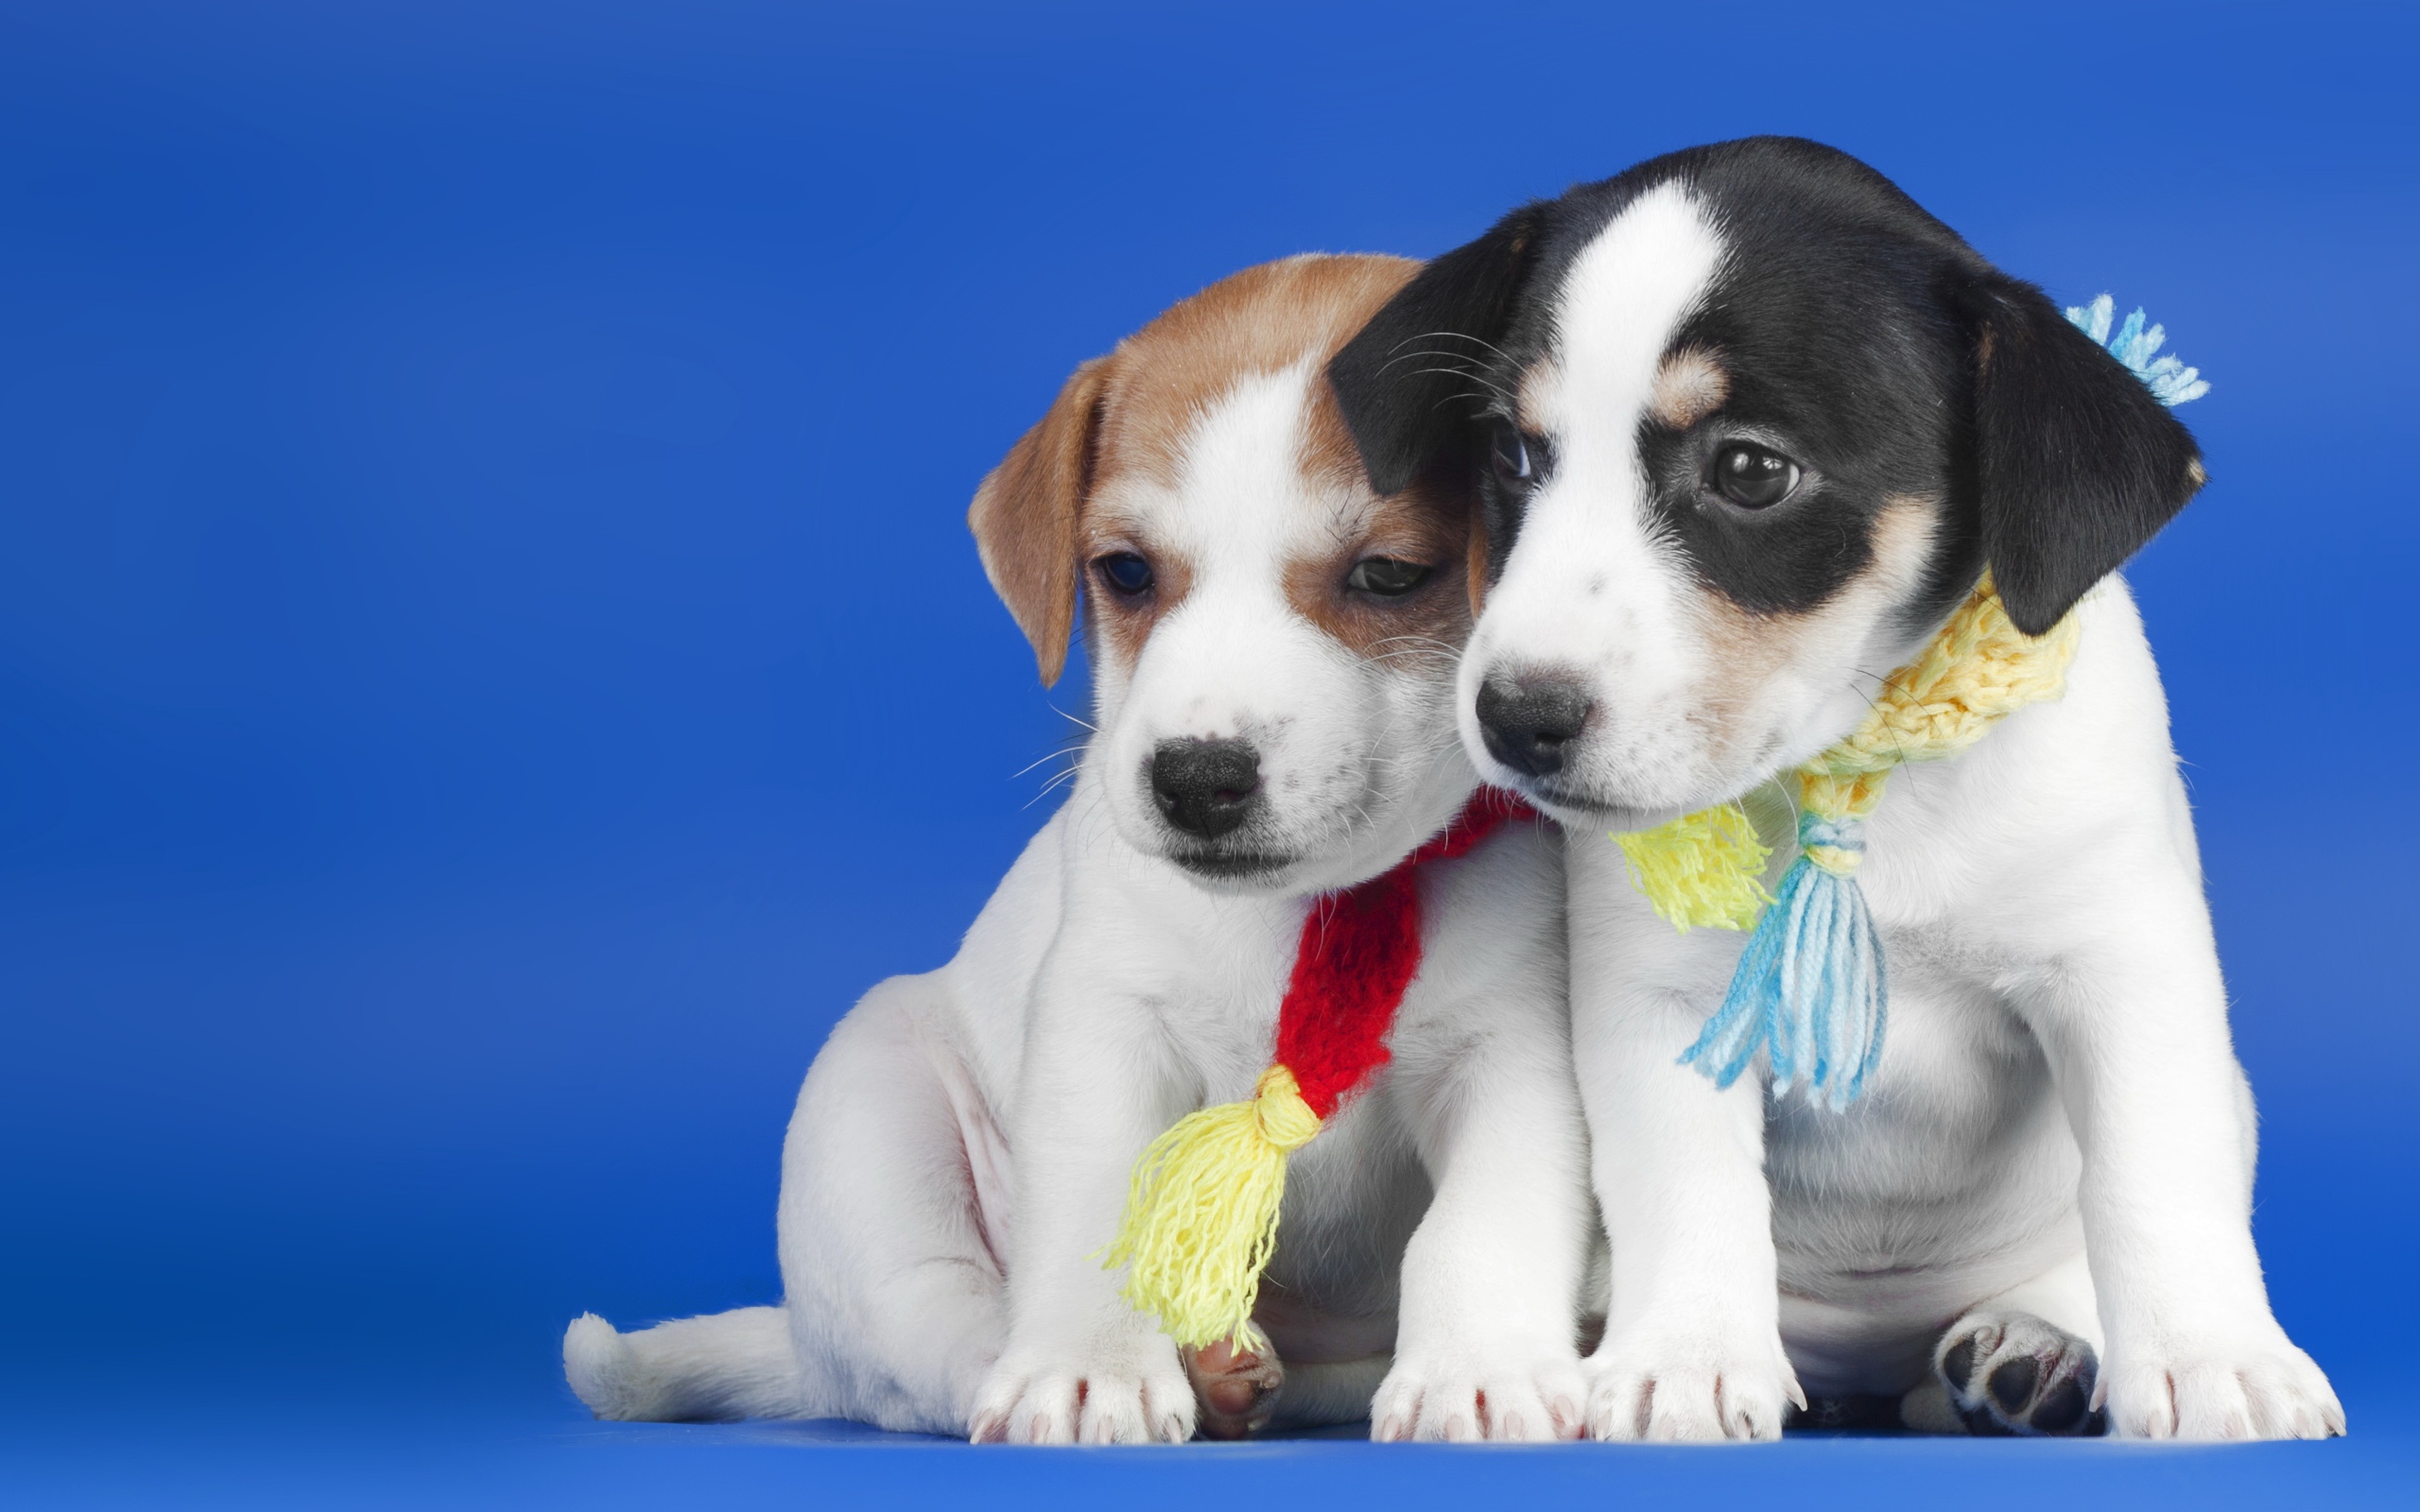 Two little cute puppies on blue background